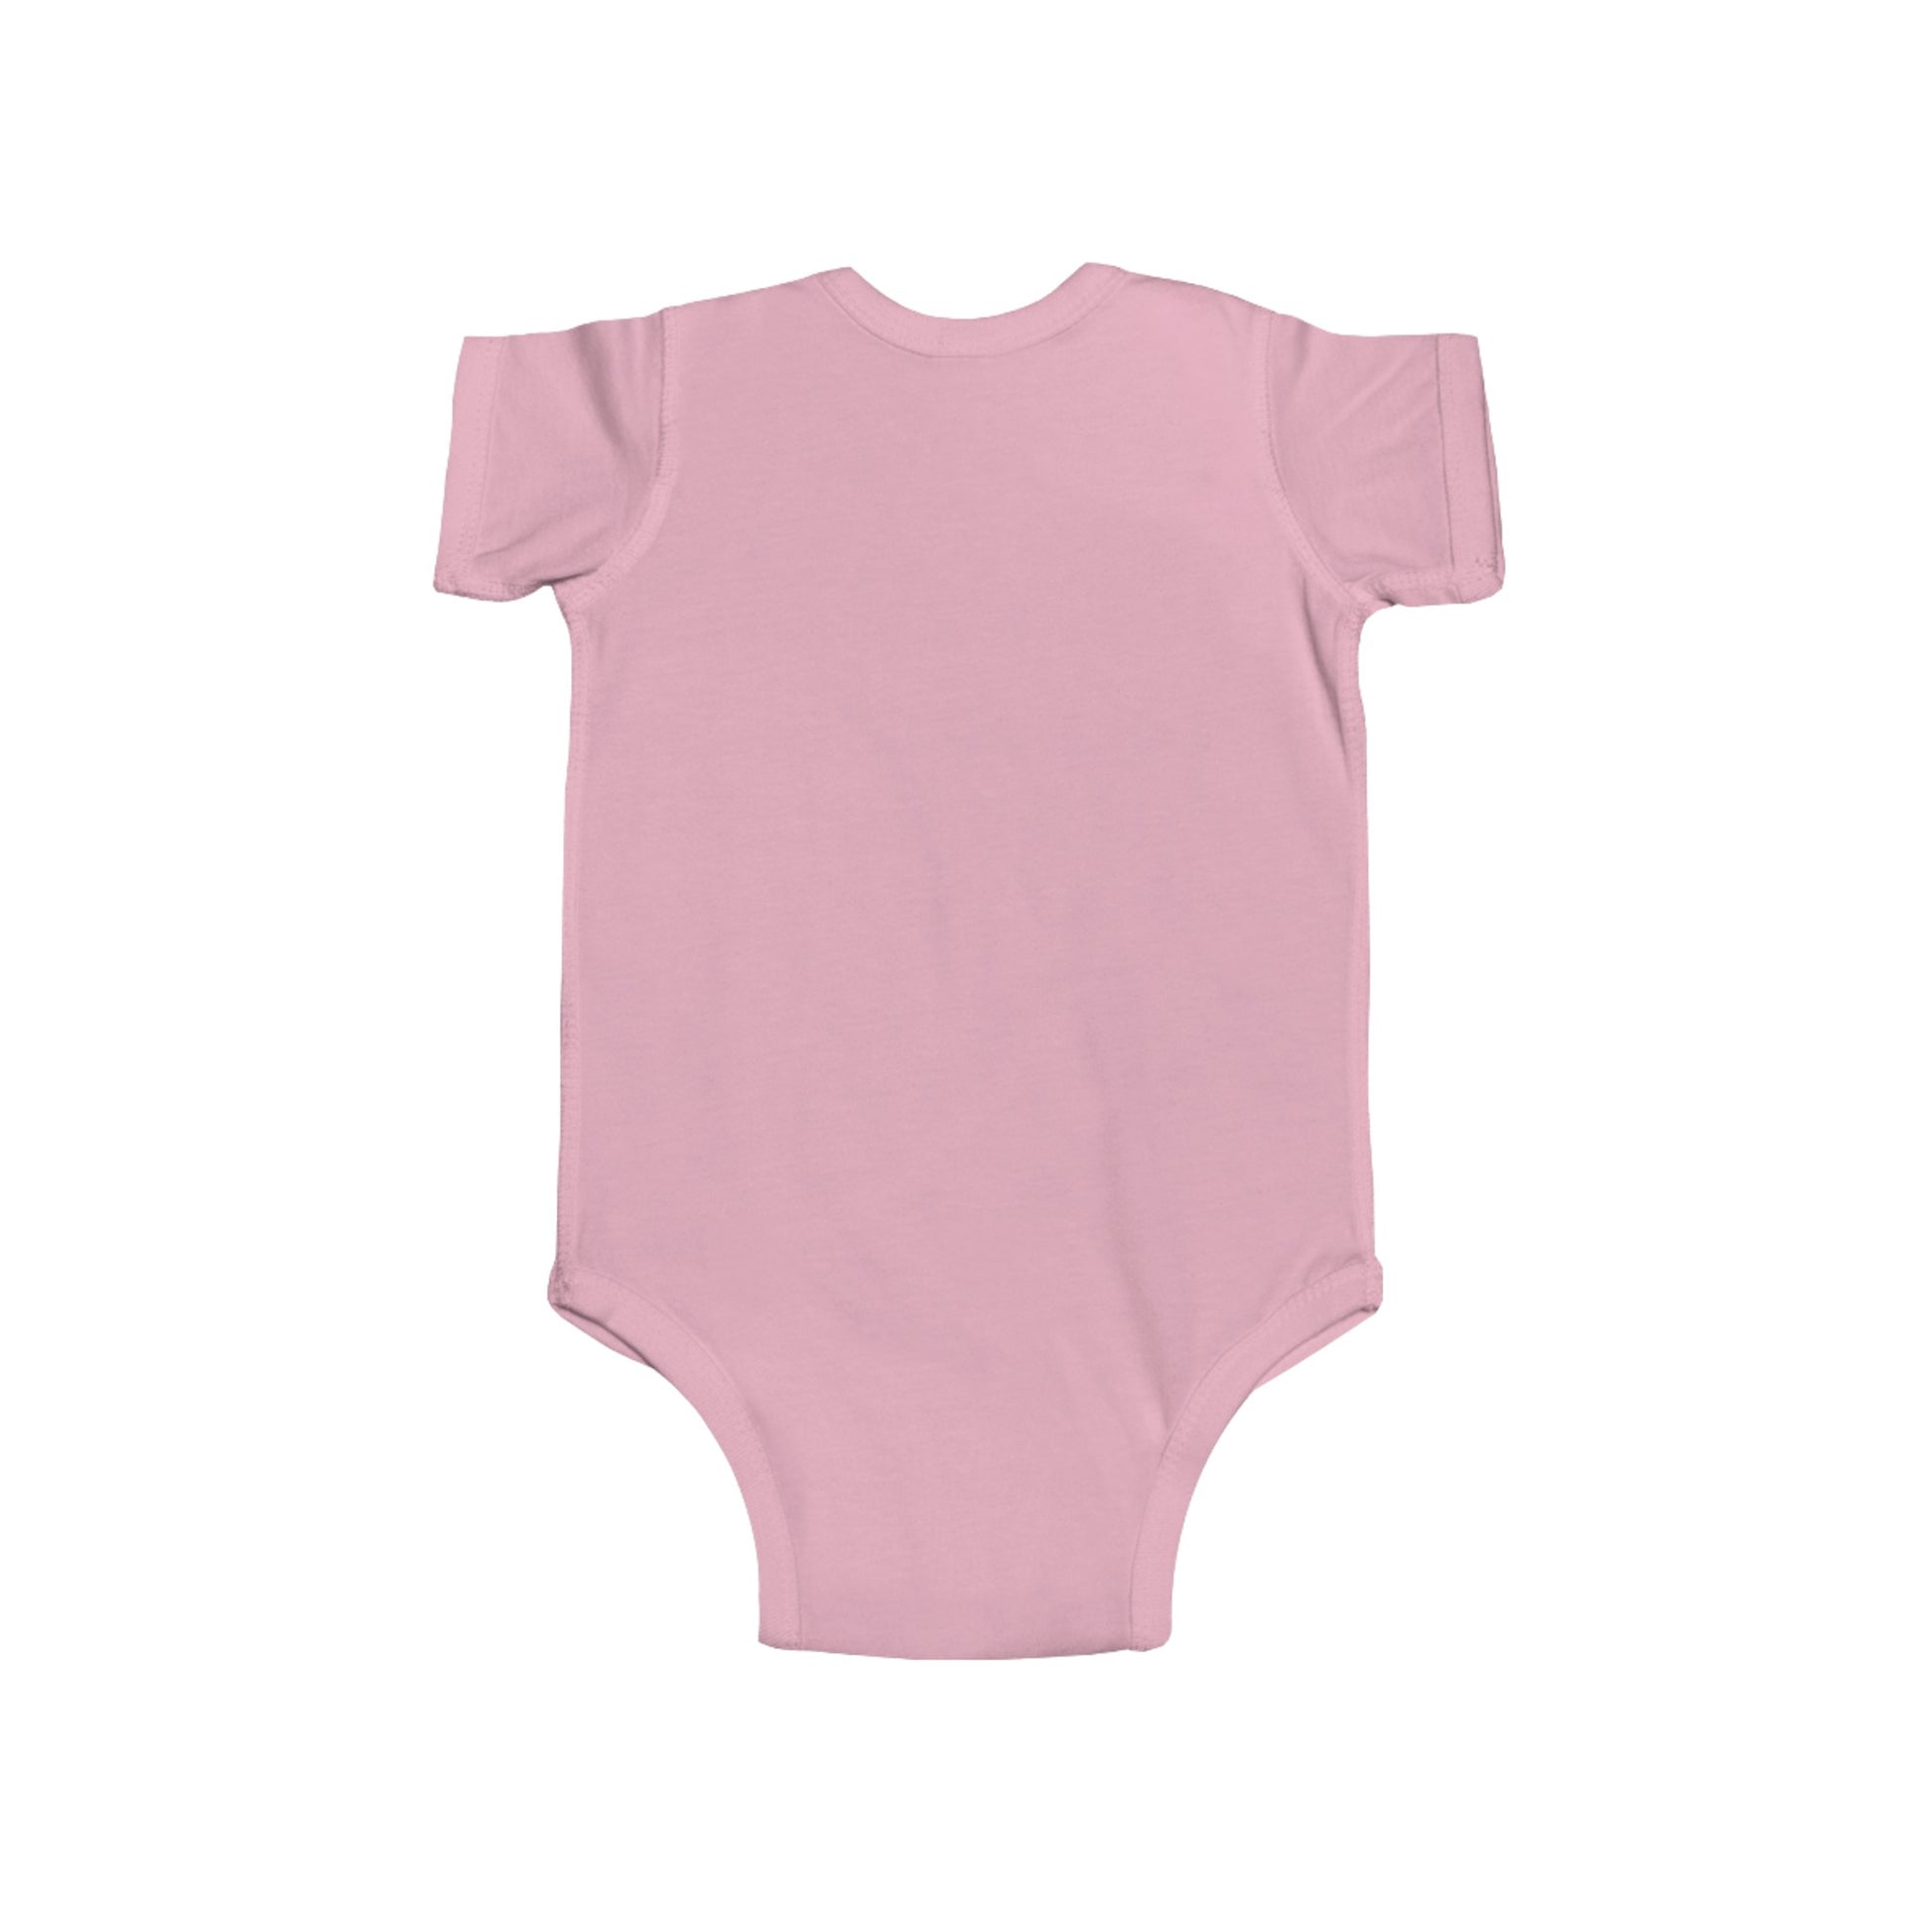 Get trendy with Born to sparkle Onsie - Kids clothes available at Good Gift Company. Grab yours for $13.50 today!